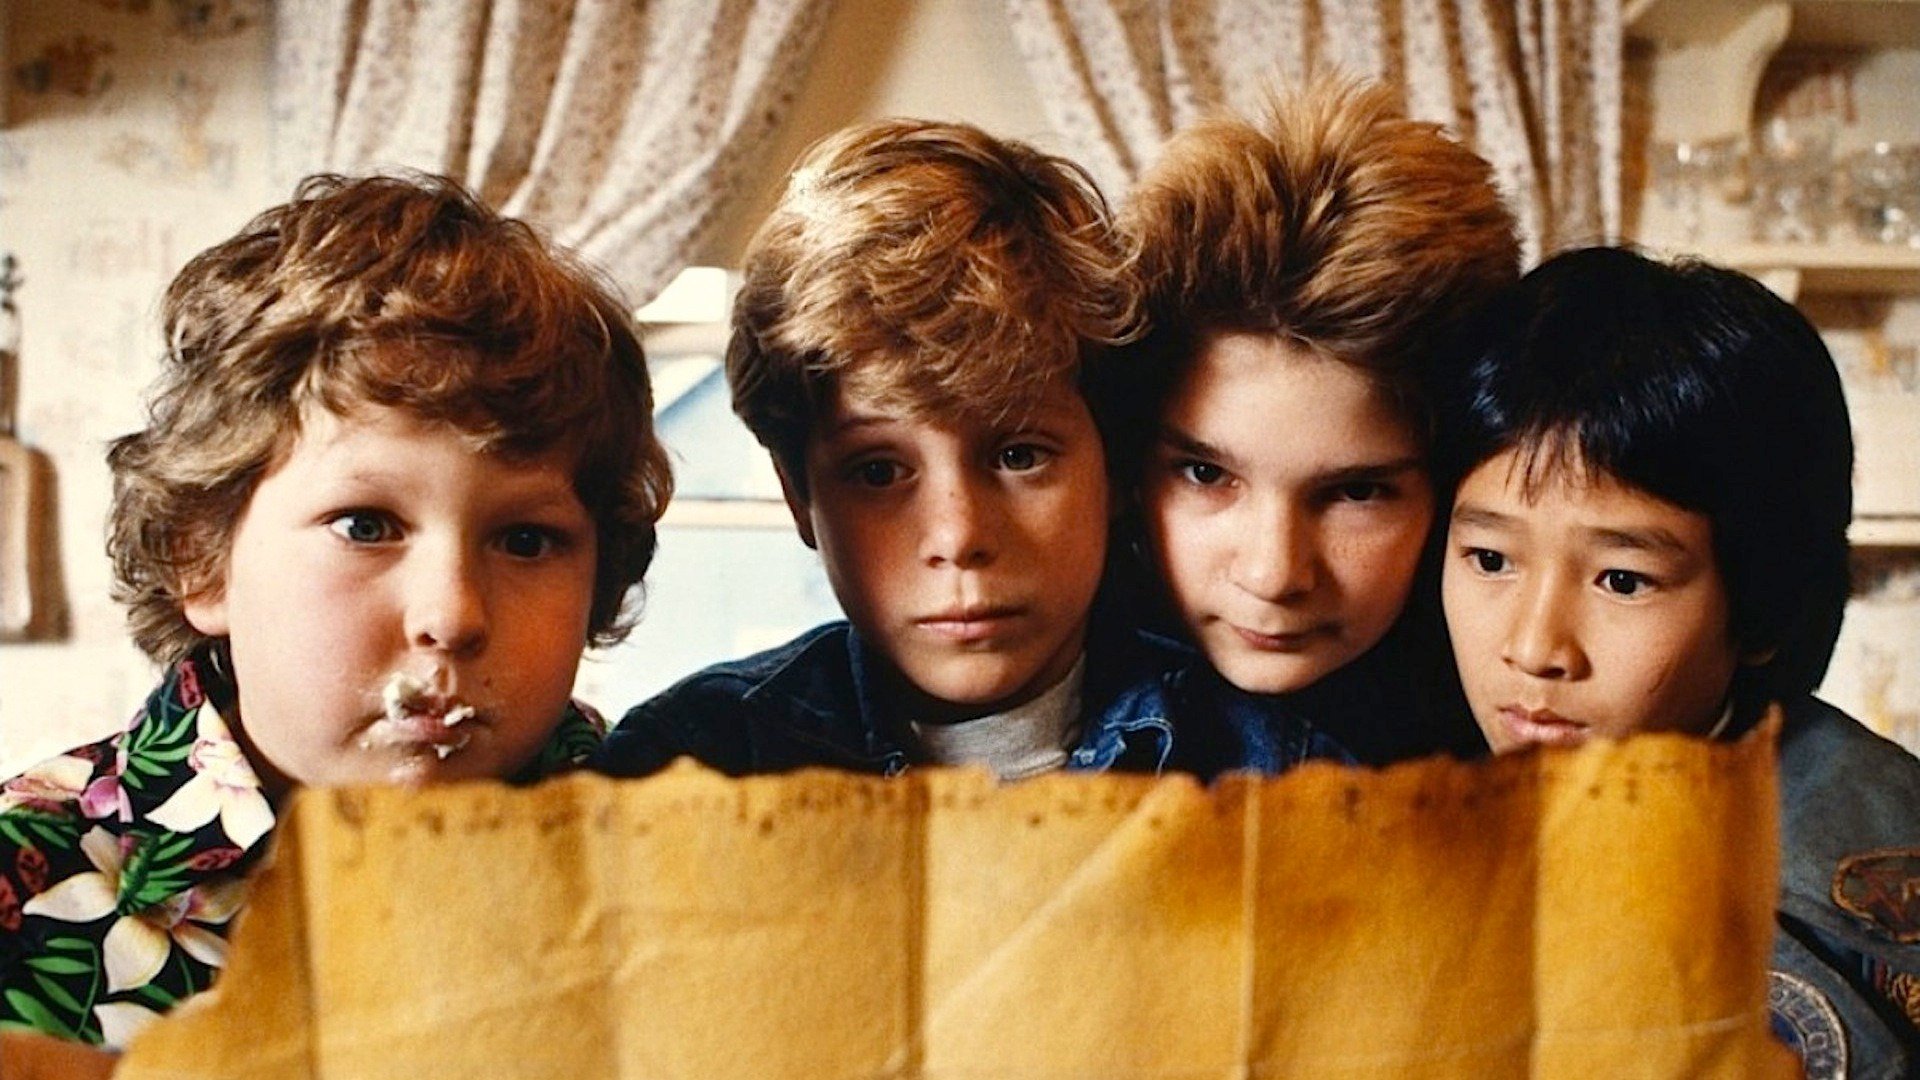 How Much Do You Remember About The Goonies?